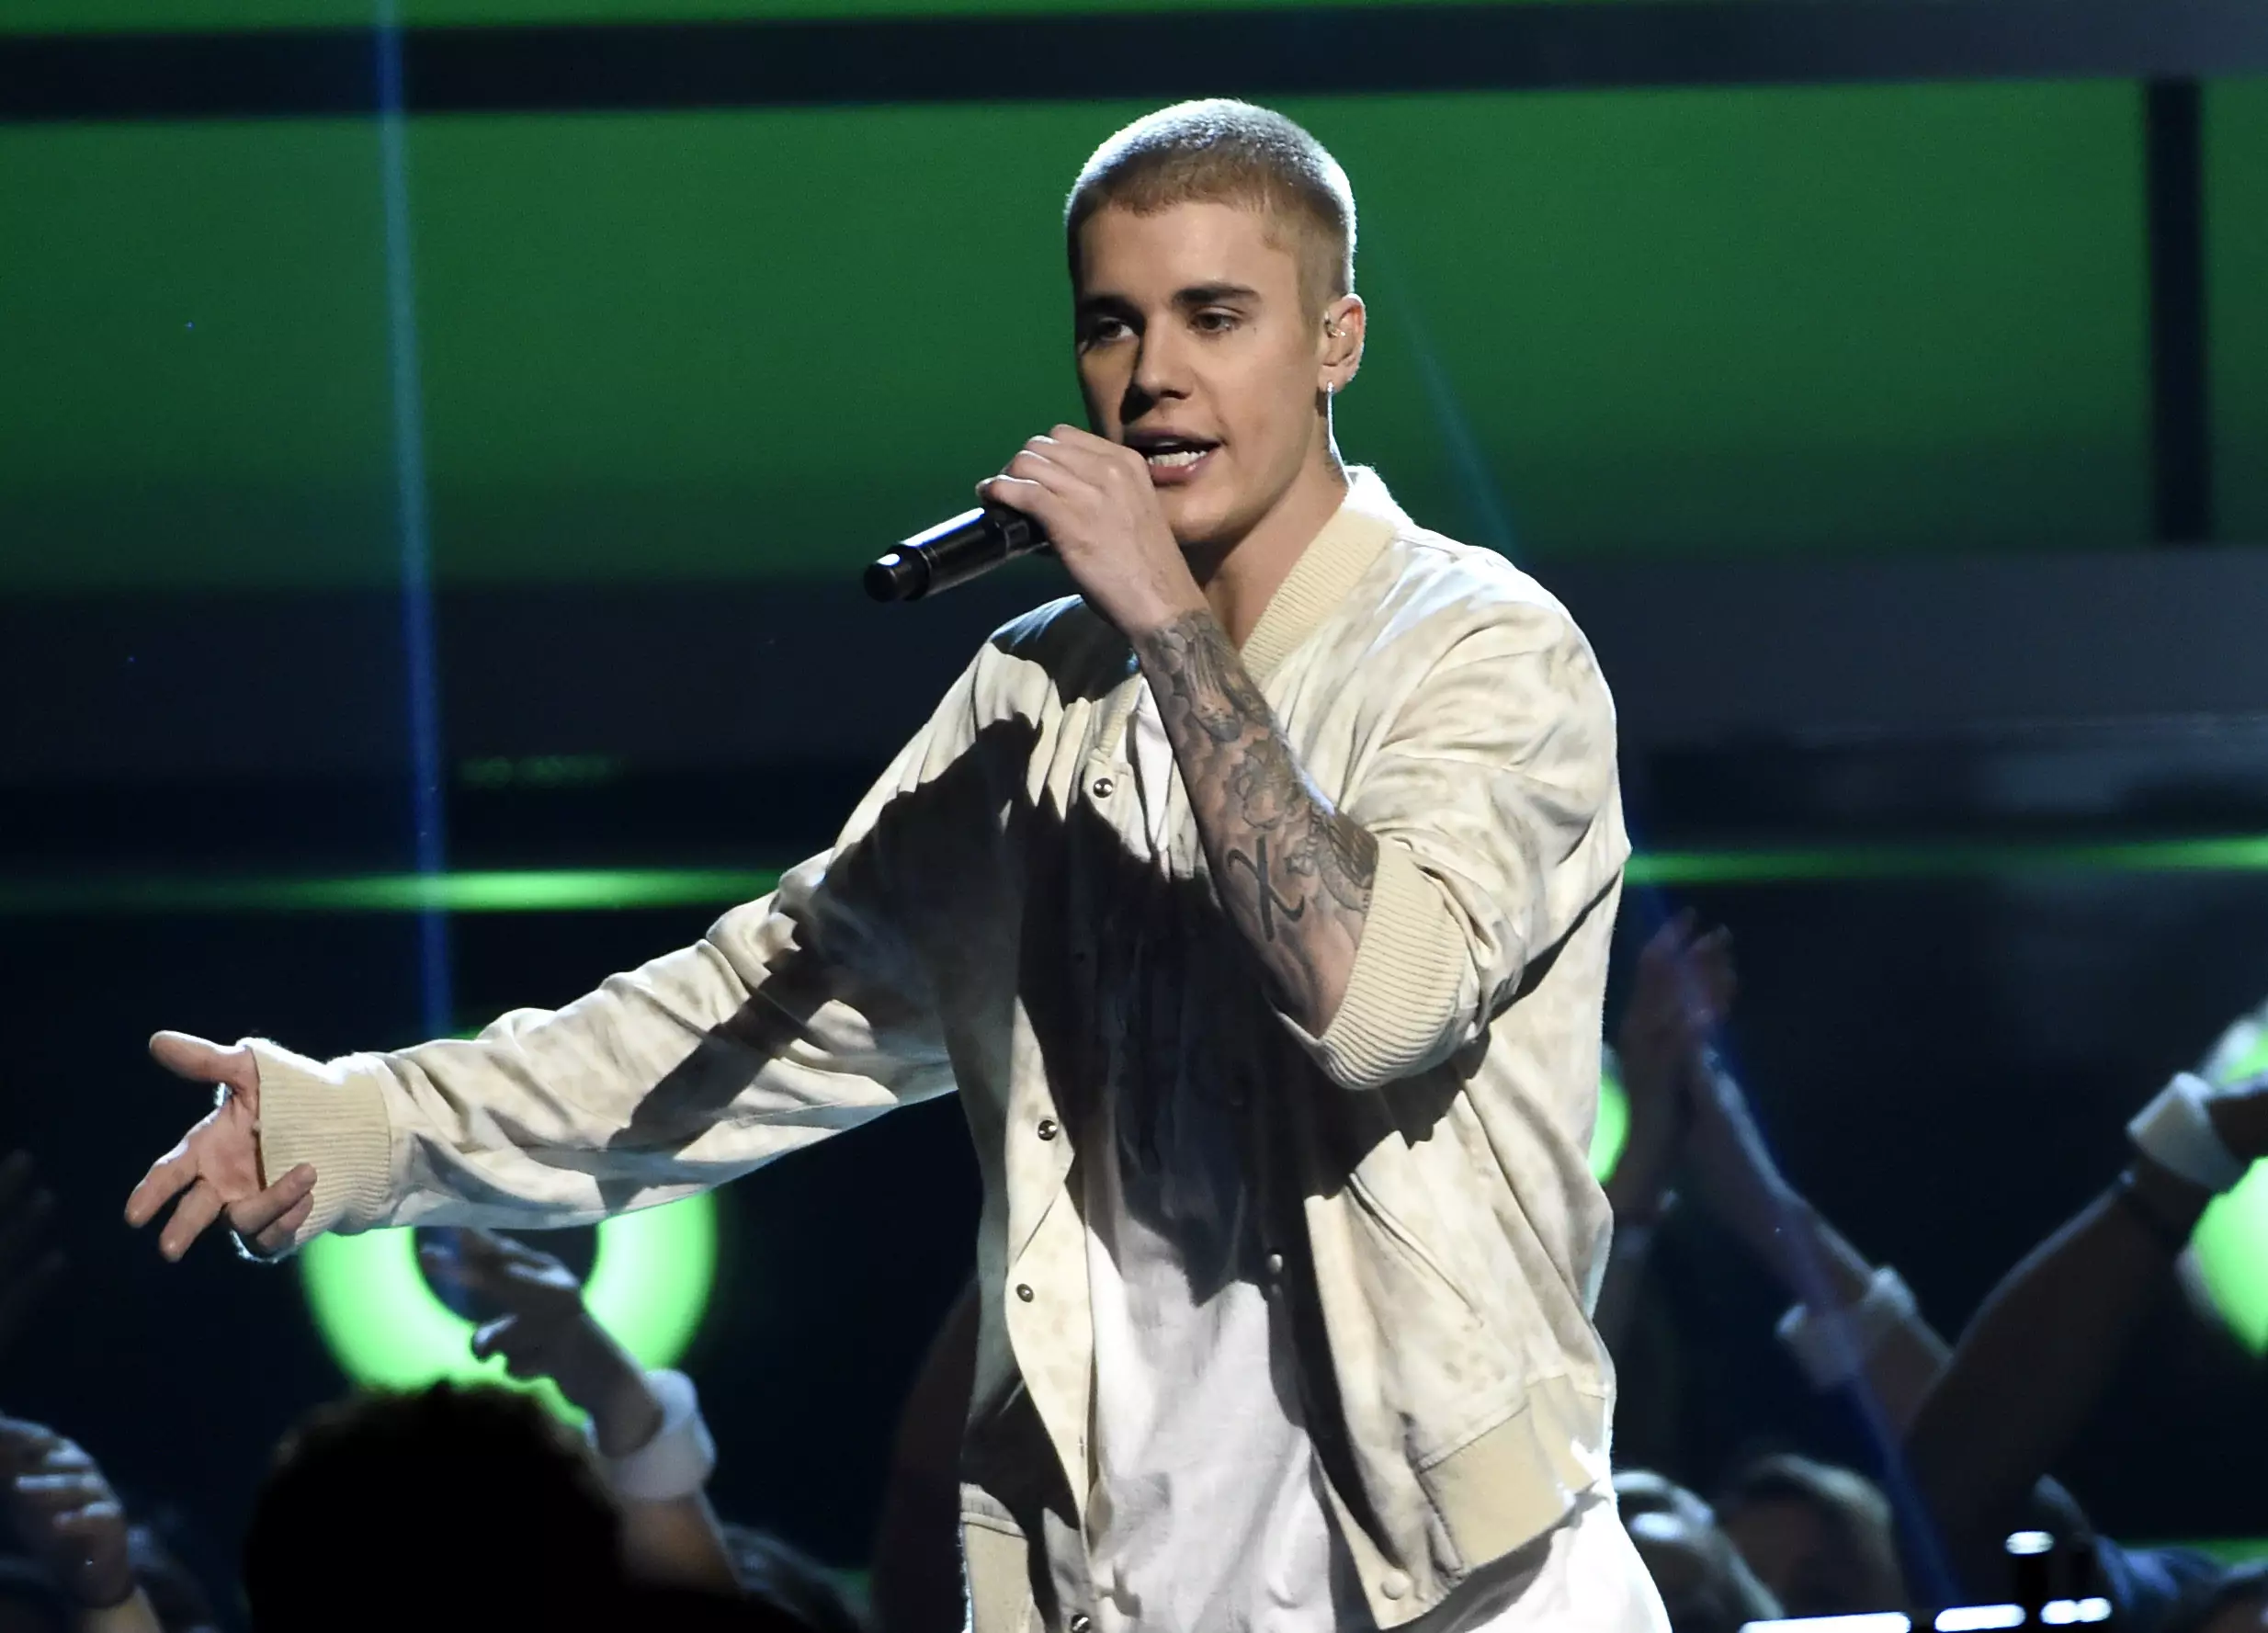 Justin Bieber Storms Off Stage As Fans Boo Him In Manchester